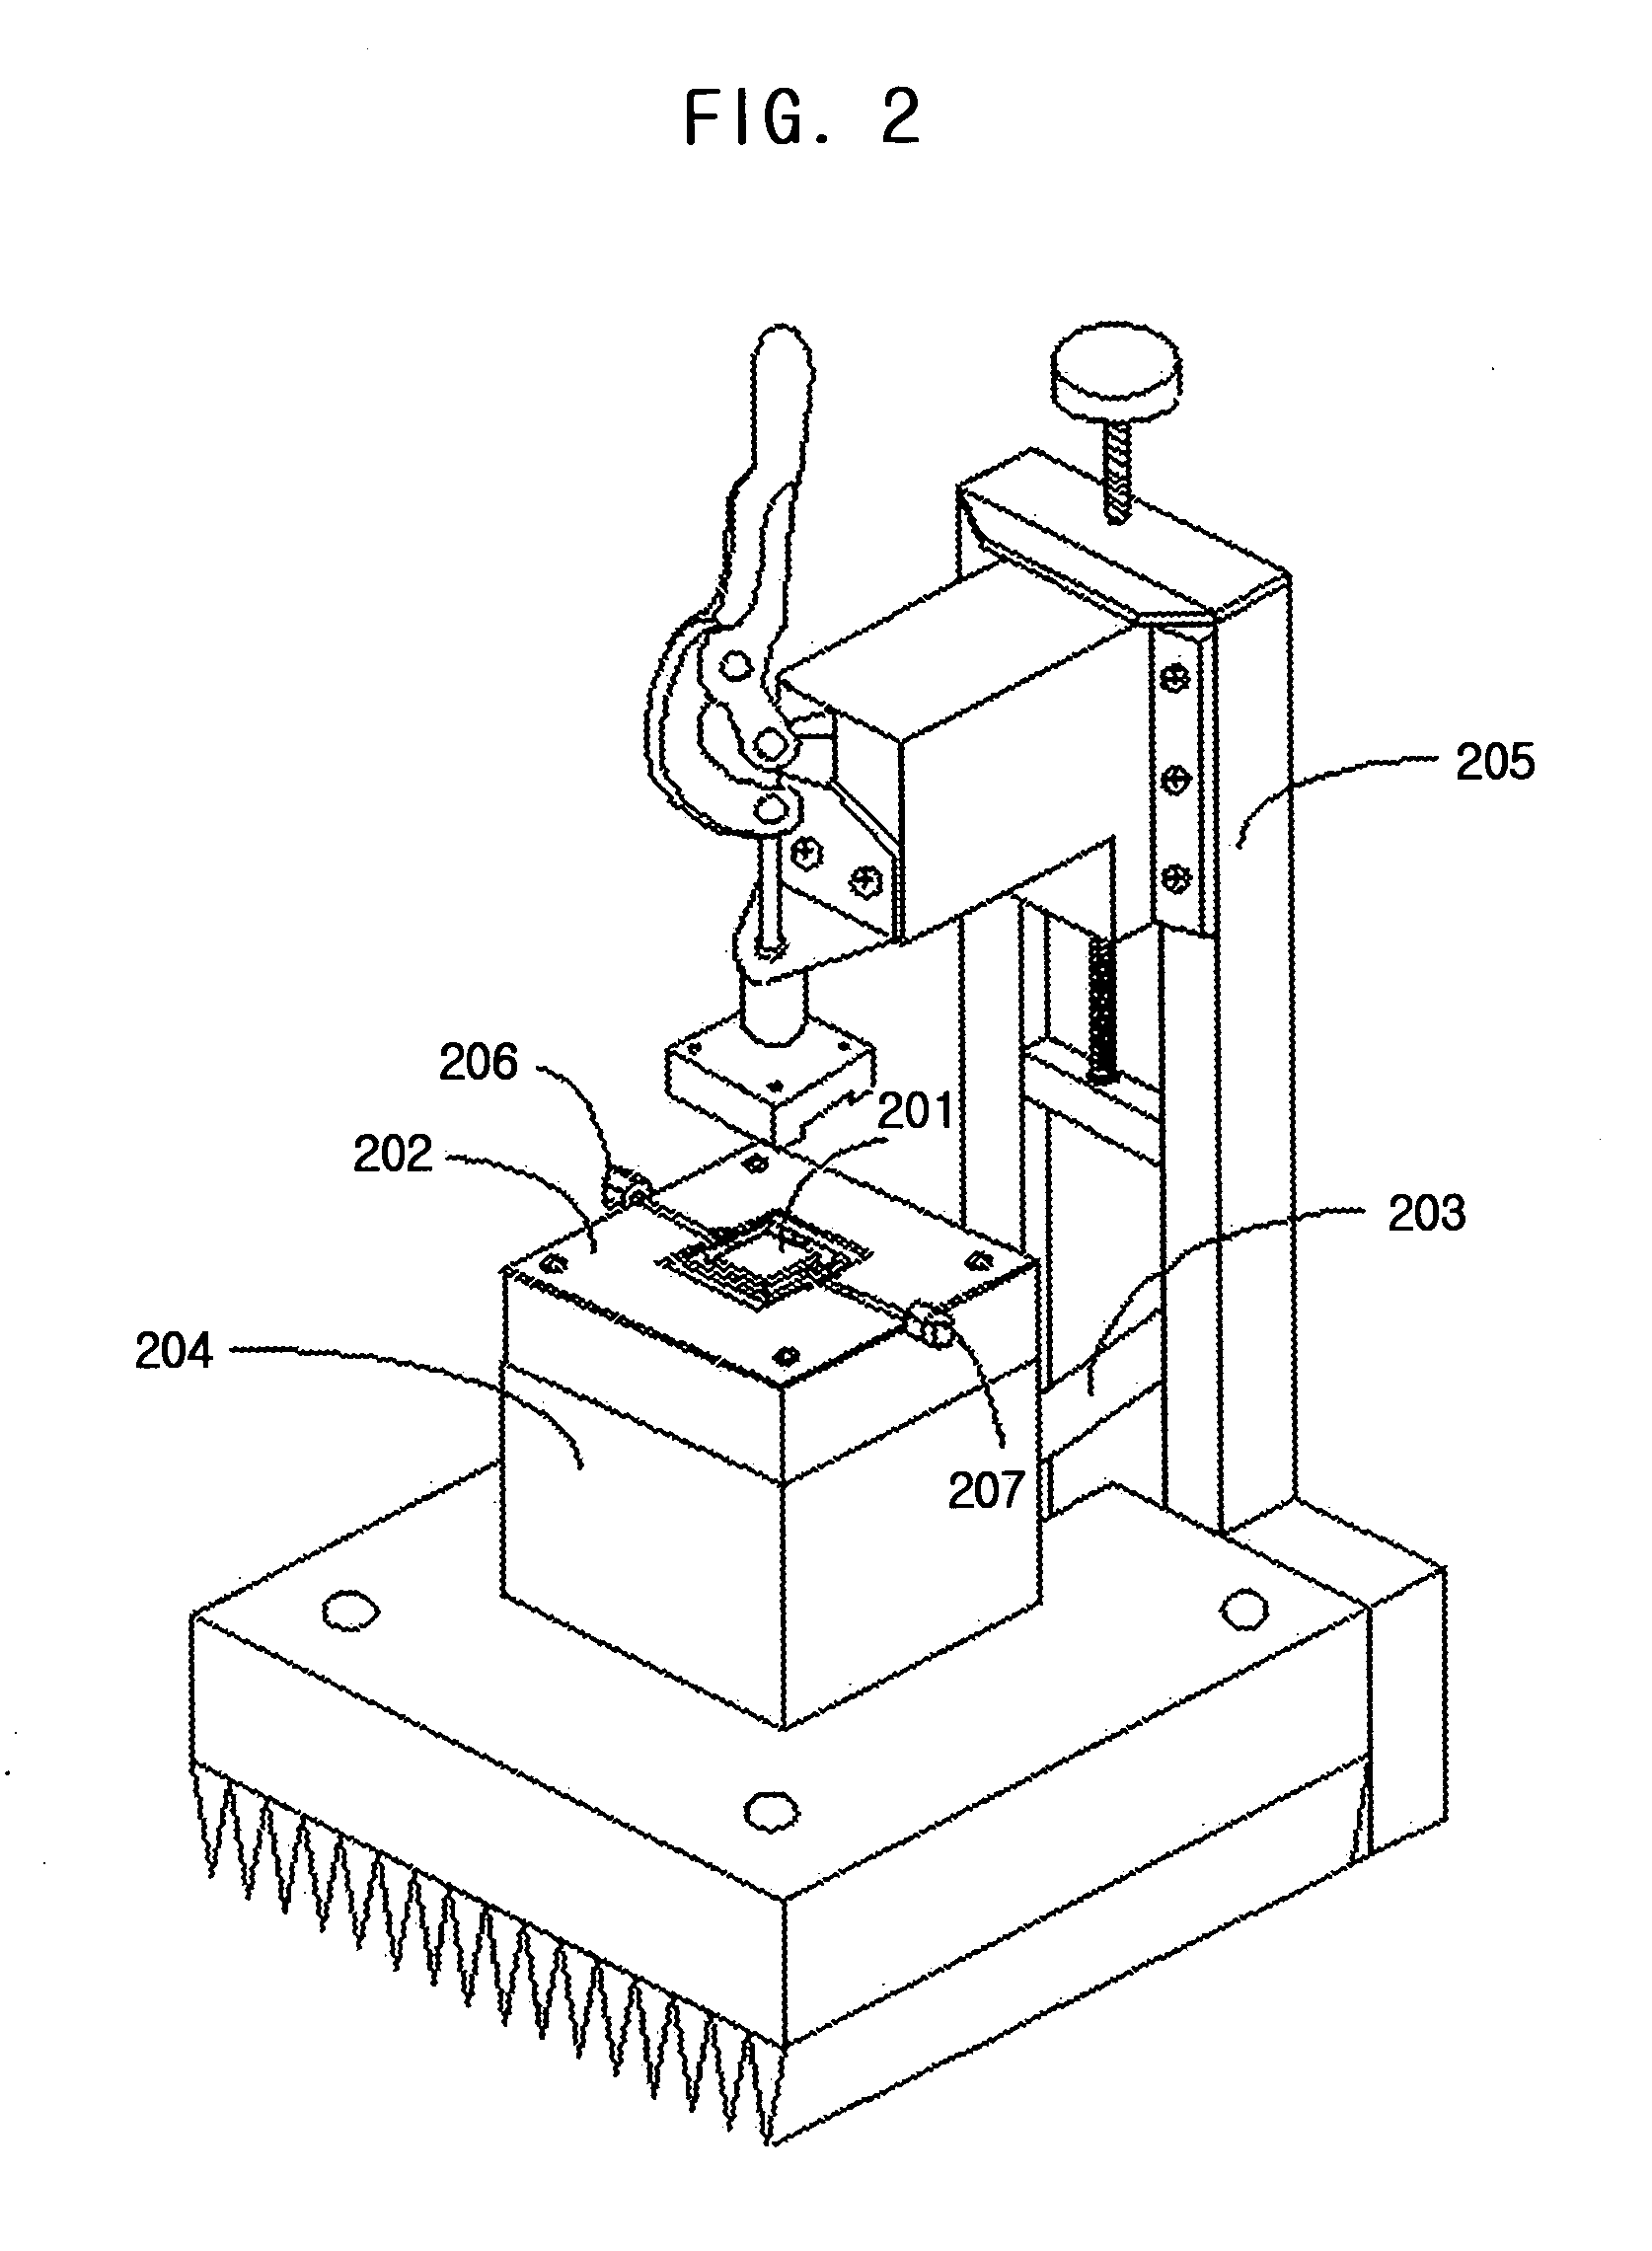 System and method for testing power durability of saw filter